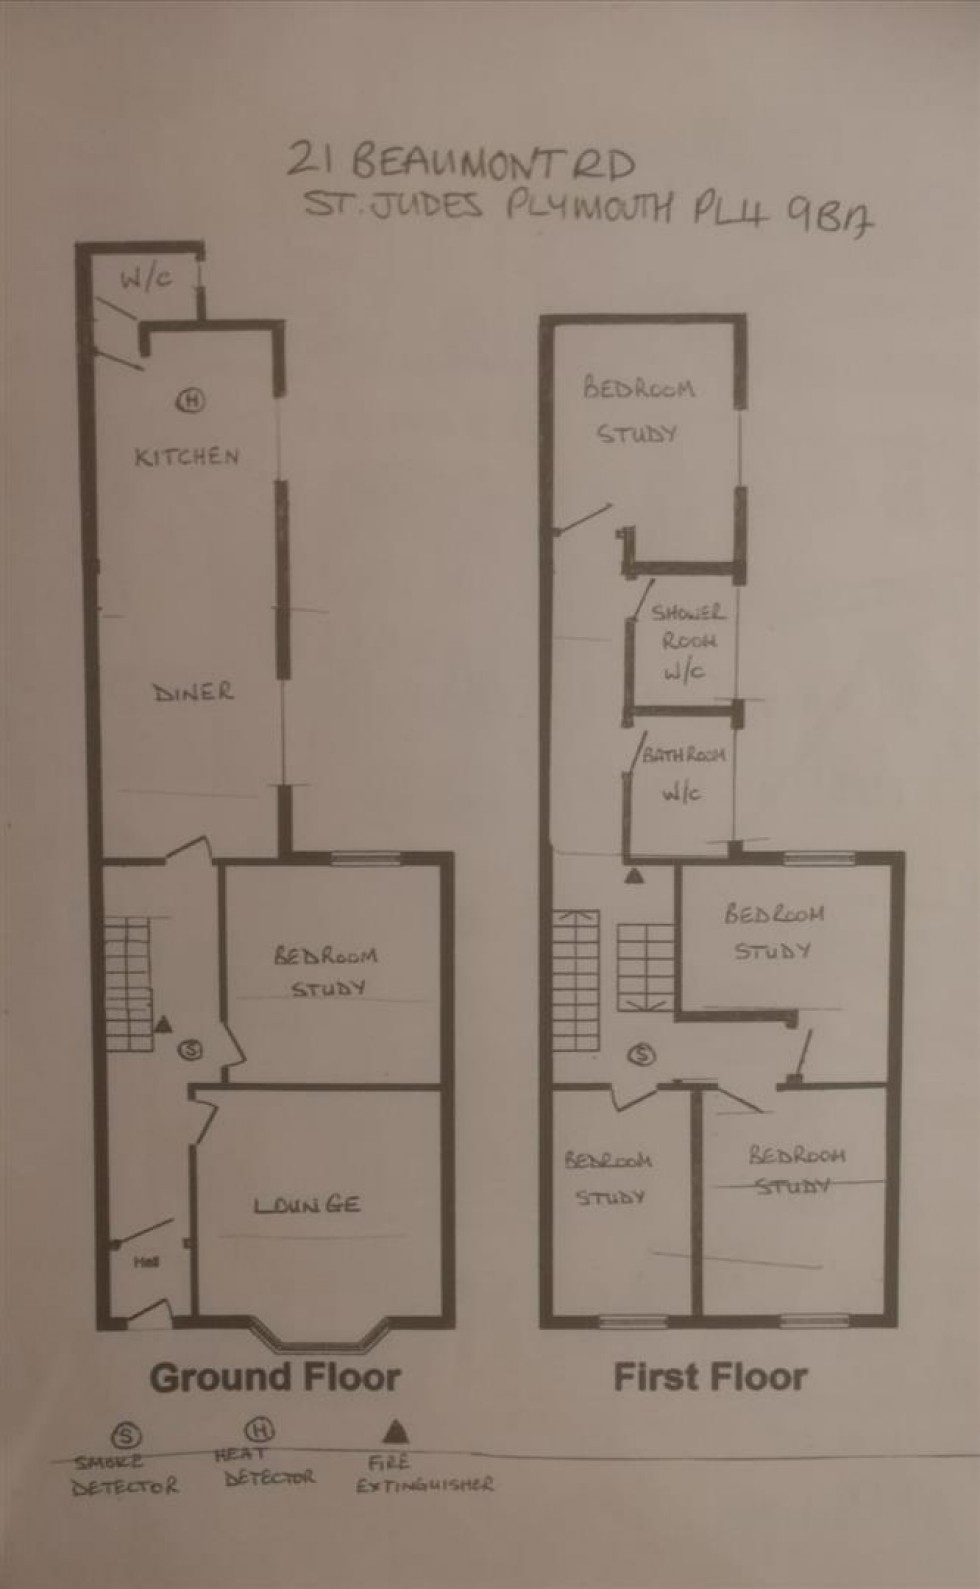 Floorplan for Beaumont Road, Plymouth